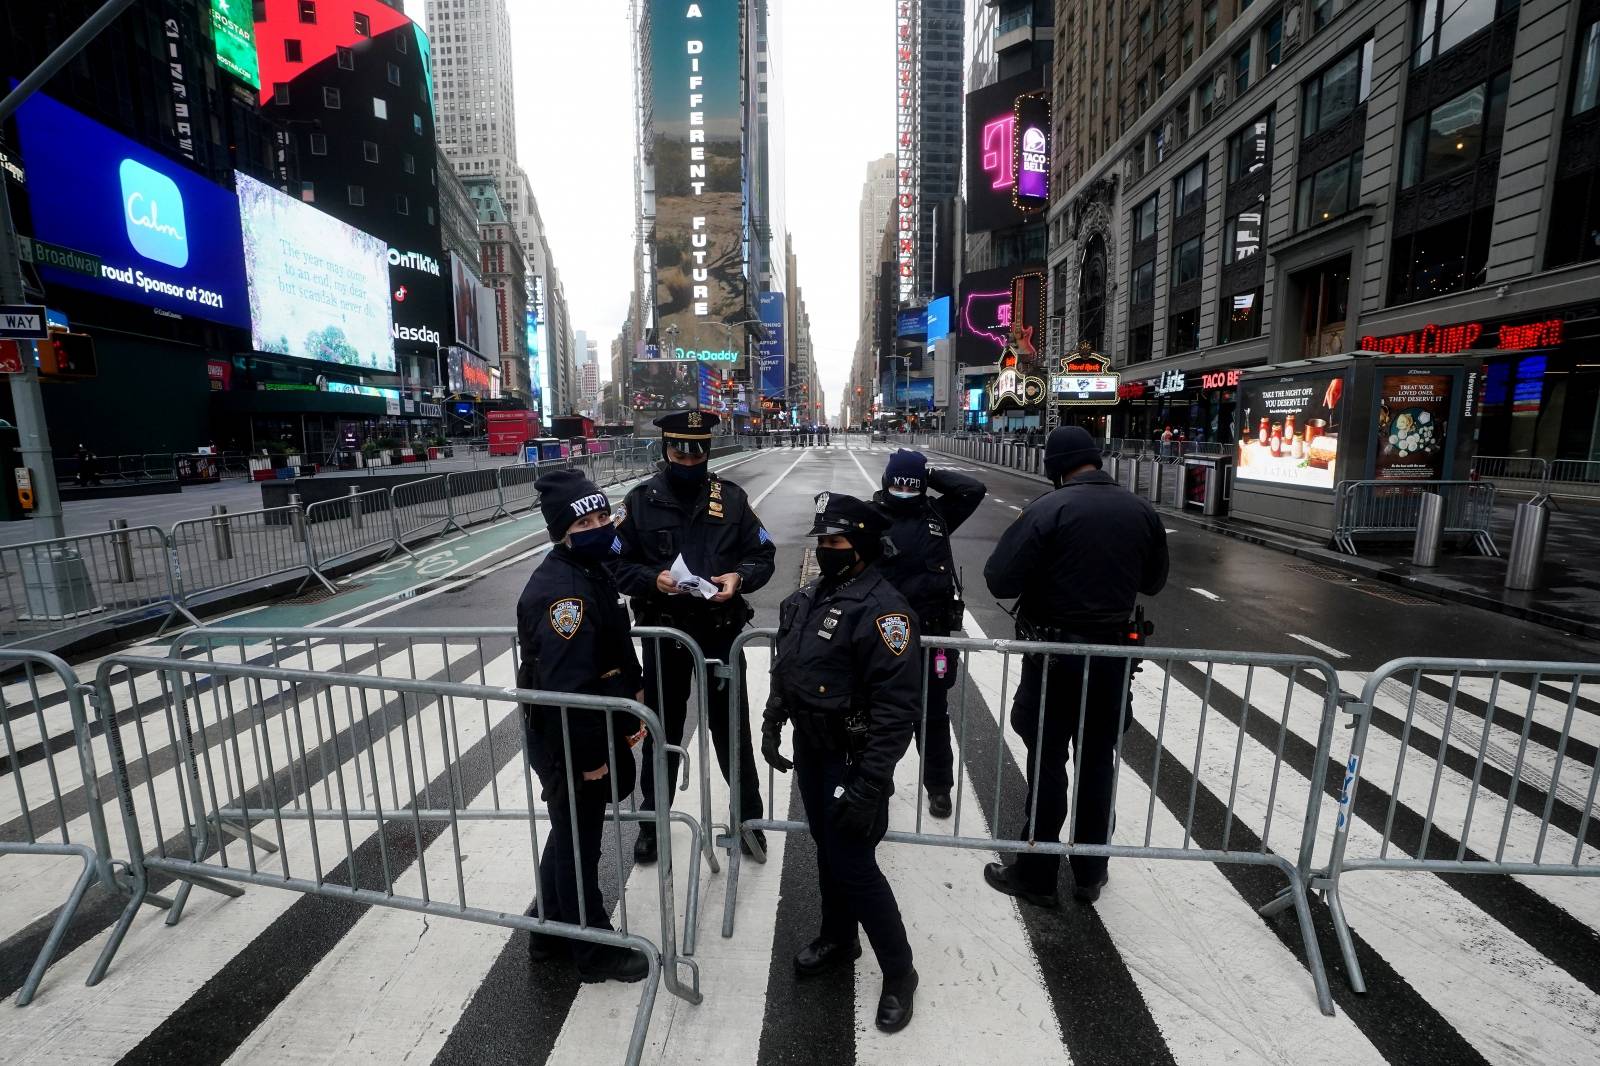 Police man checkpoints to prevent people from entering Times Square ahead of New Year's Eve